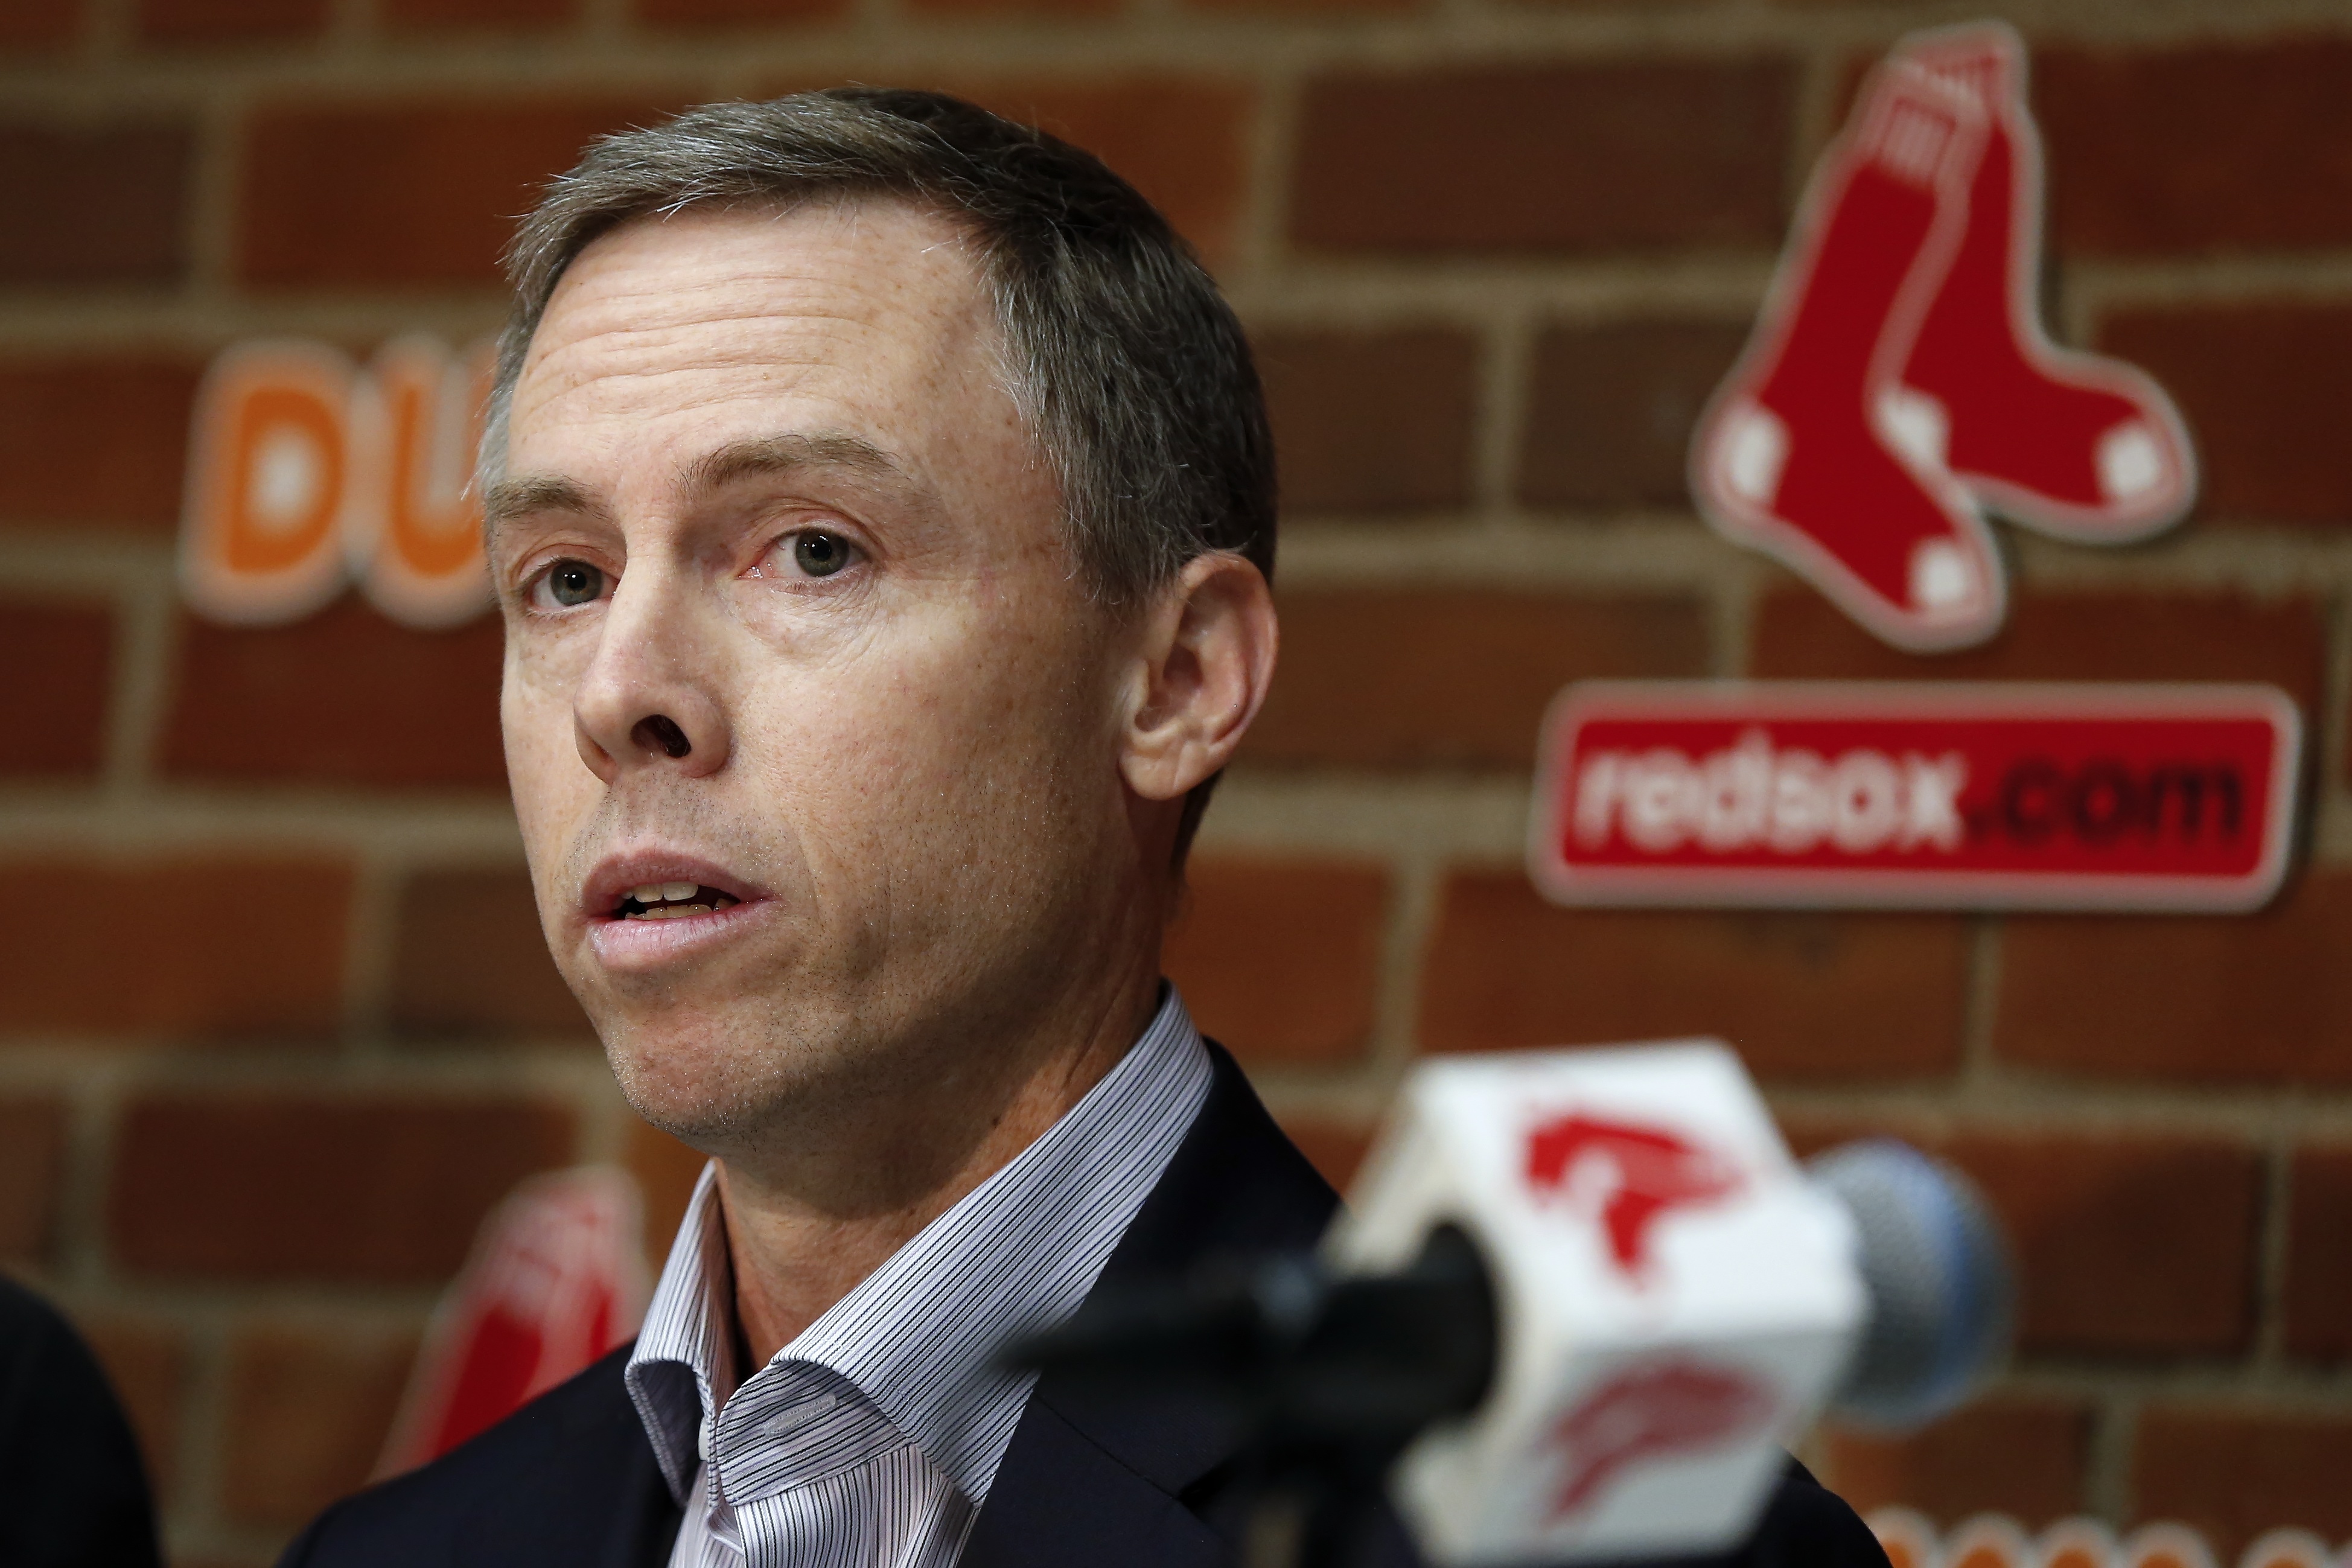 Boston Red Sox retaining Brian O'Halloran in new role, search for Bloom  replacement ongoing